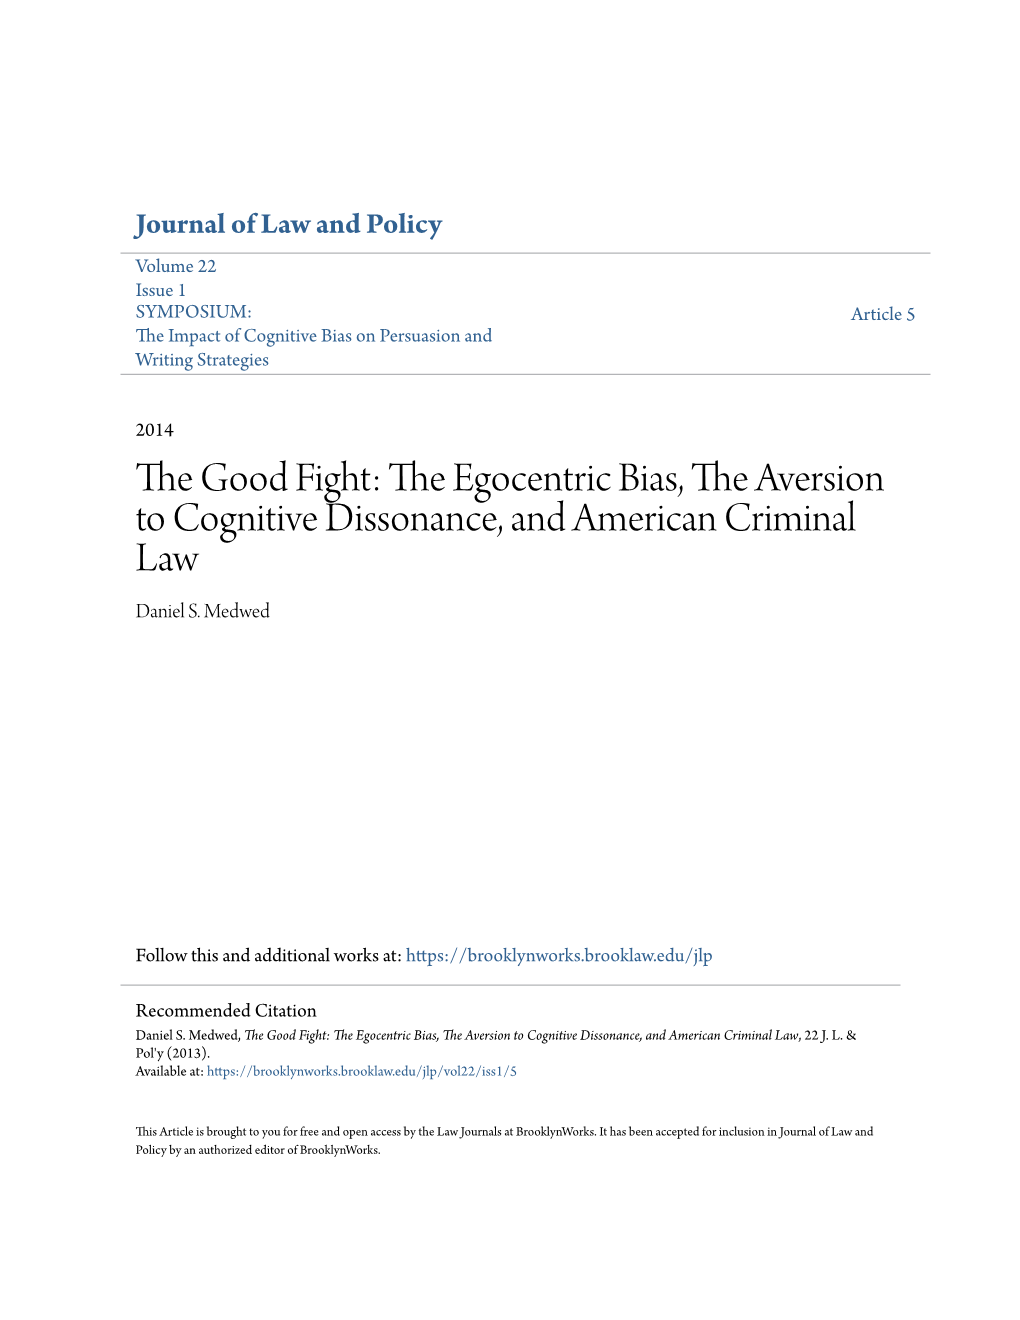 The Egocentric Bias, the Aversion to Cognitive Dissonance, and American Criminal Law, 22 J